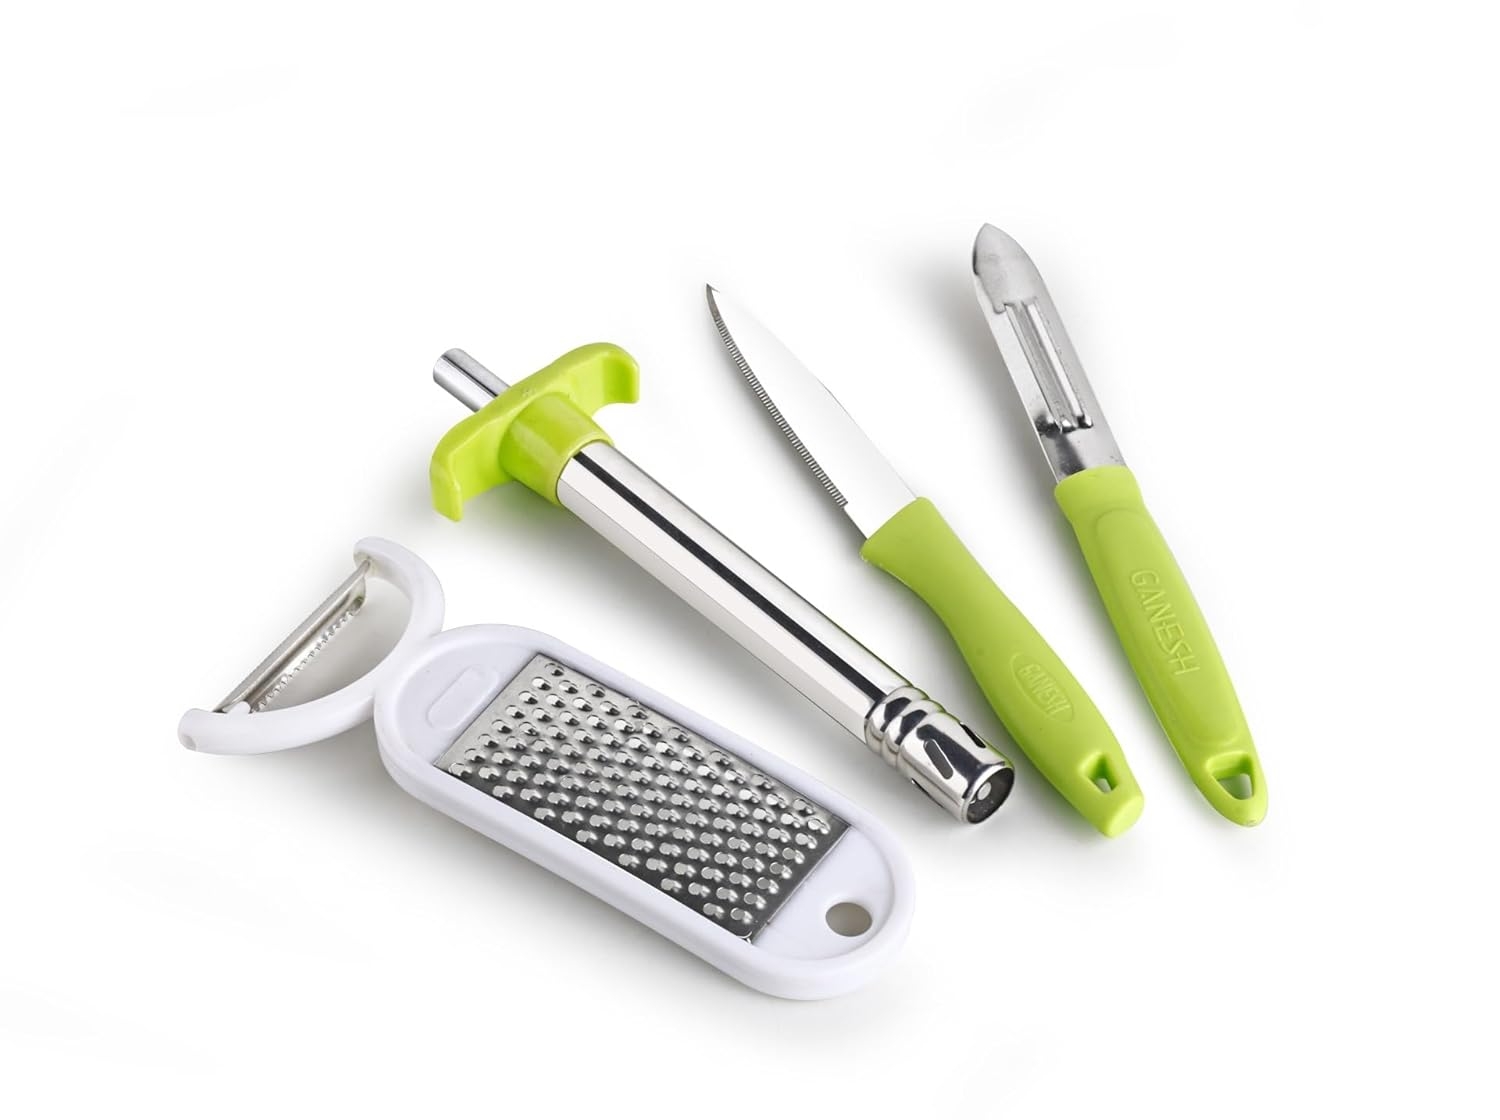 Ganesh 4 in 1 Combo Pack Included 1 Grater|1 Peeler - 1 Knife - 1 Gas Lighter|Multicolor Gas Lighters